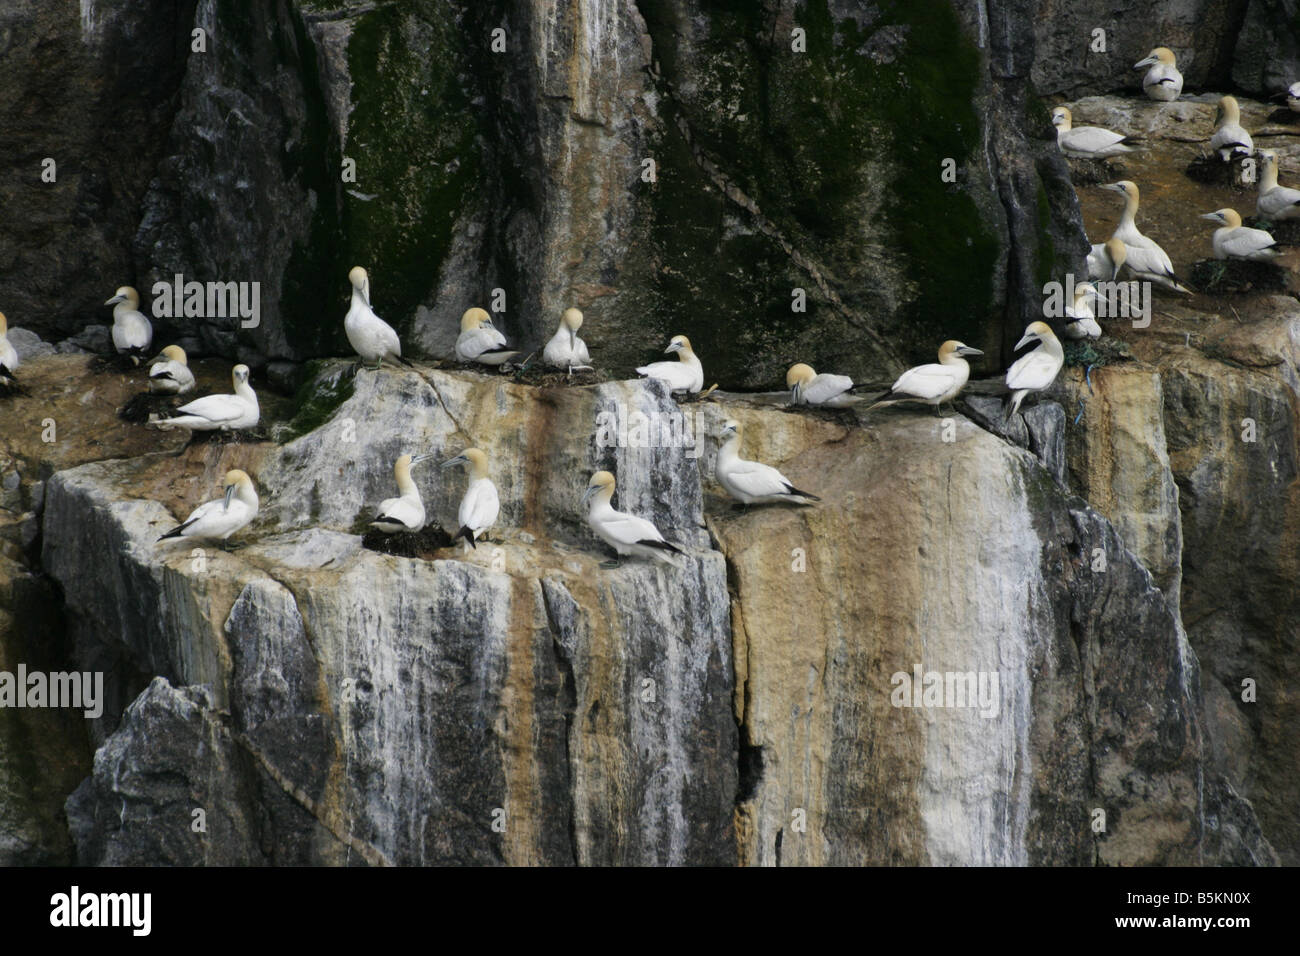 Part of the huge gannet colony on the remote Scottish island of Sula Sgeir Stock Photo